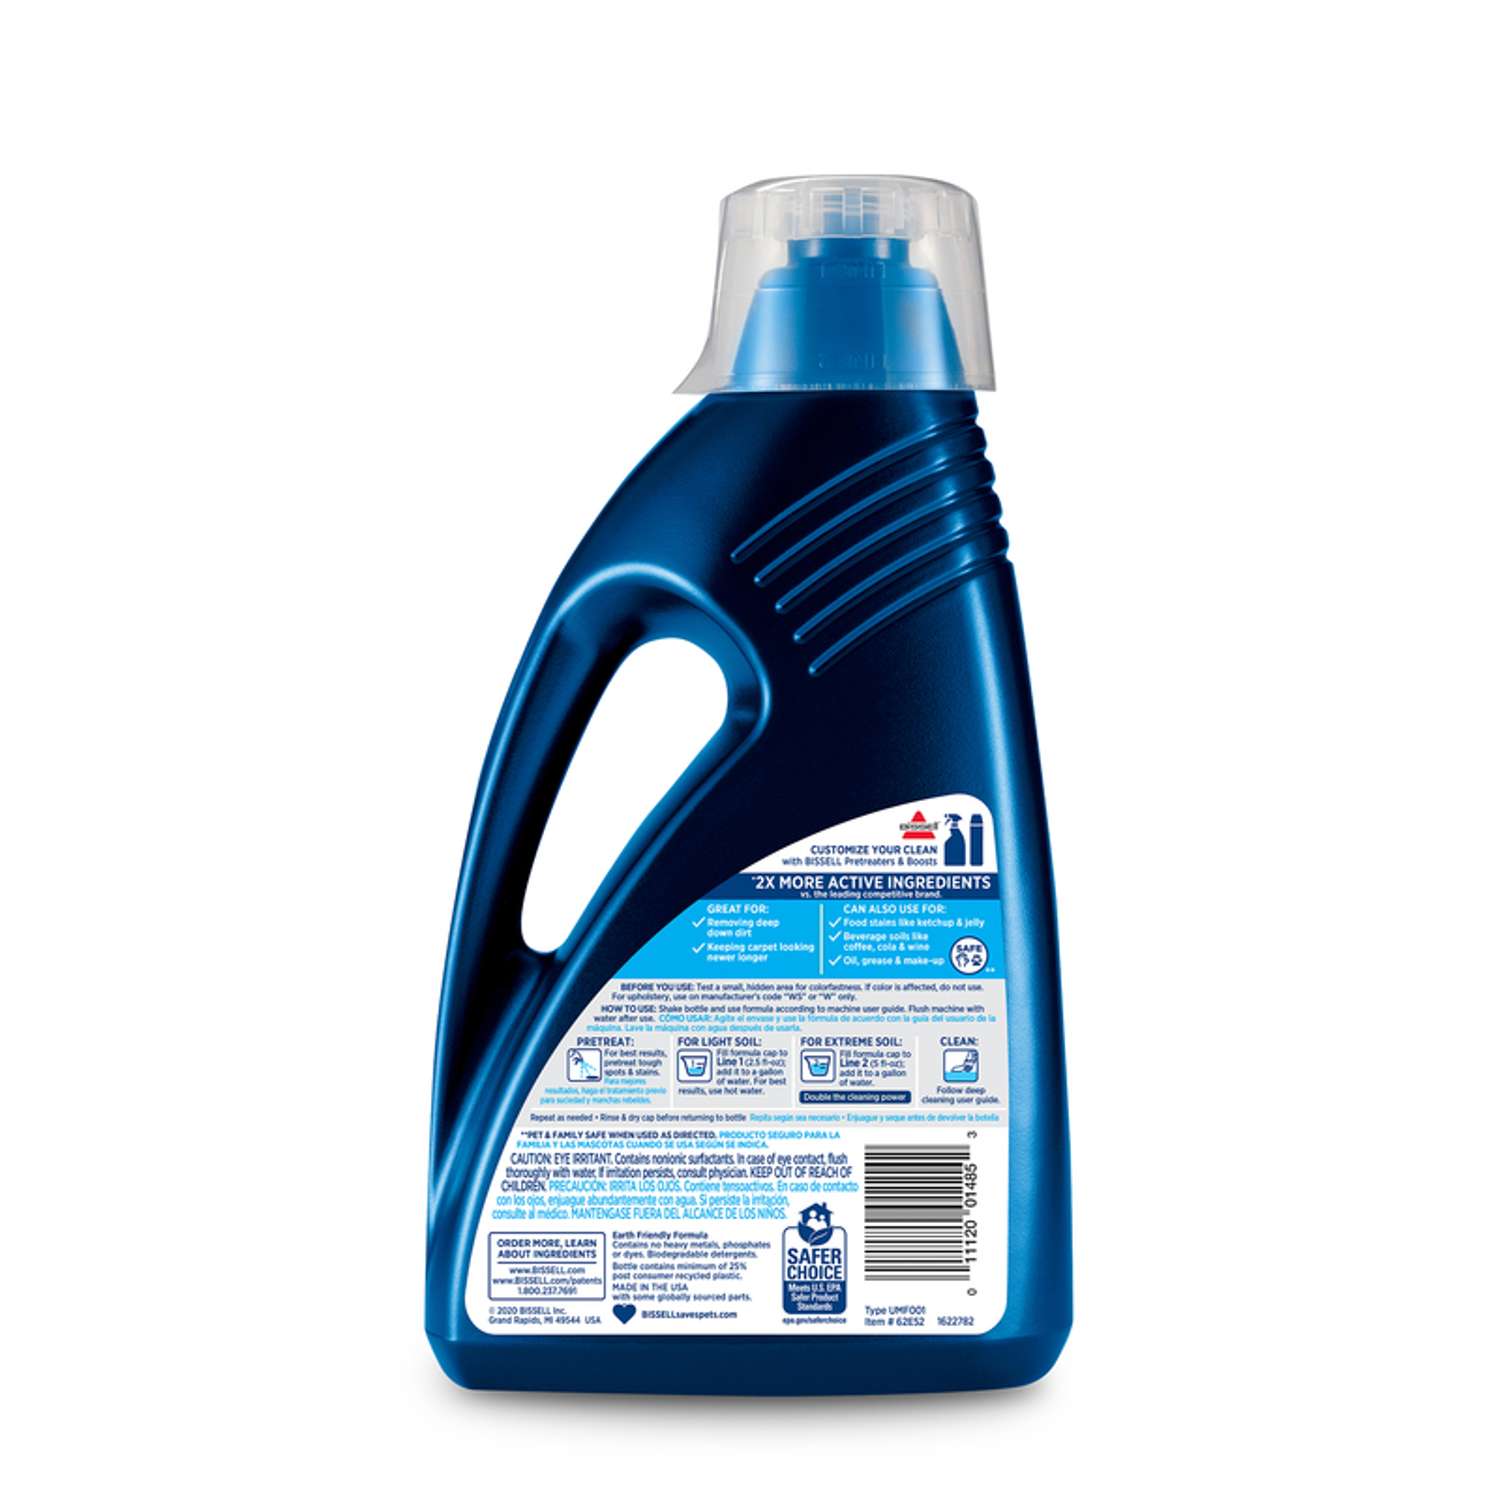 BISSELL CARPET AND UPHOLSTERY CLEANER 